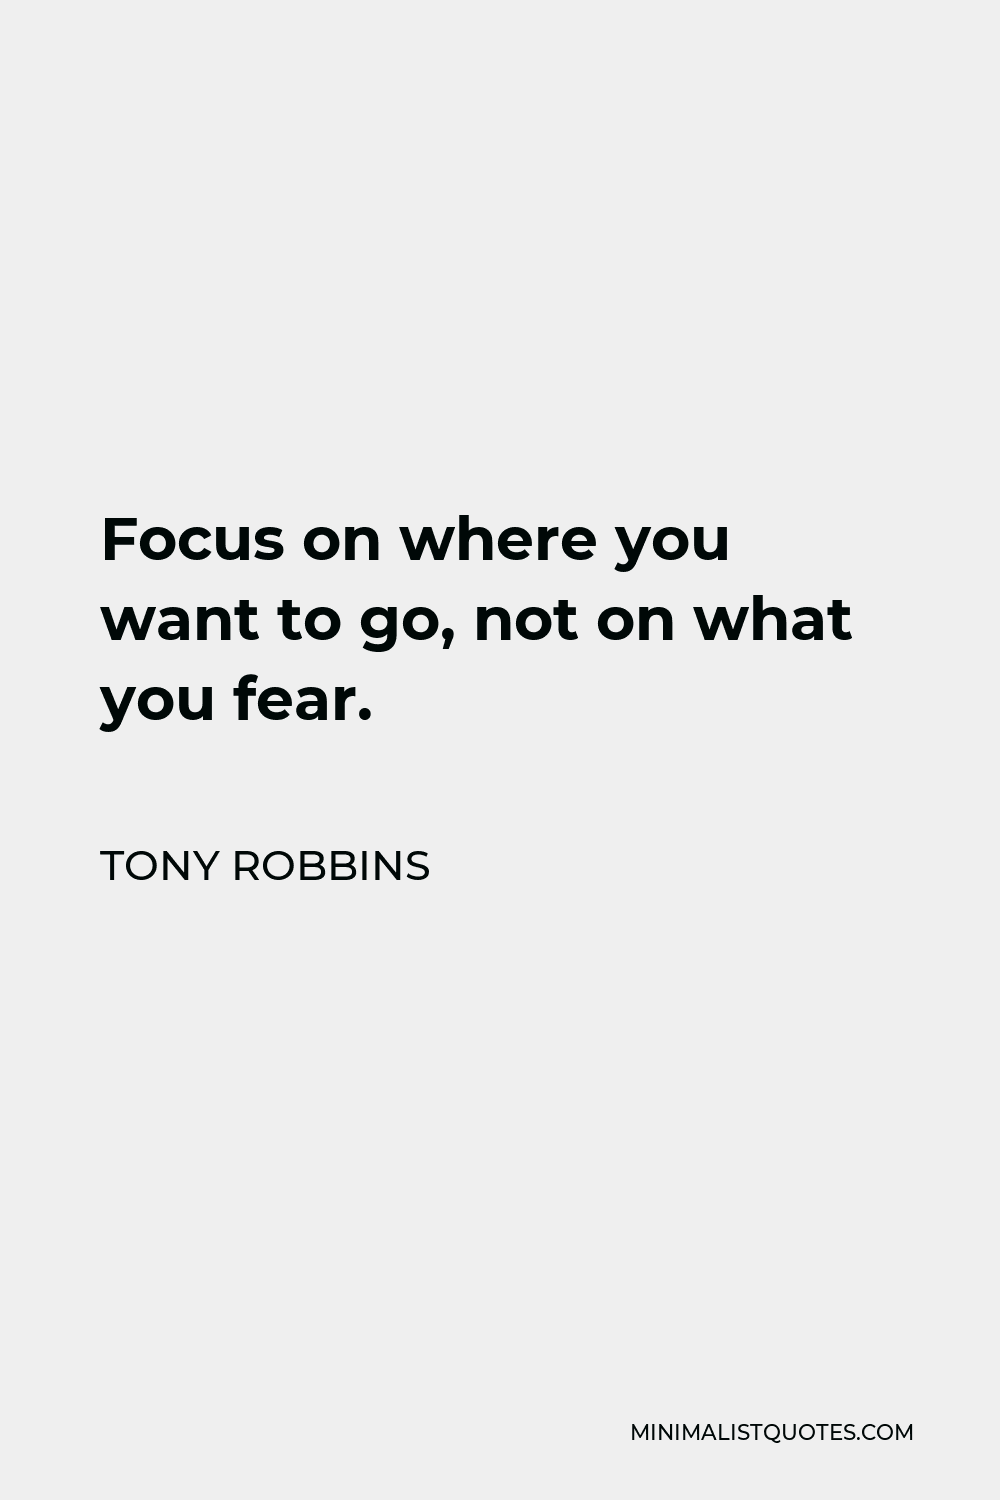 Tony Robbins Quote - Focus on where you want to go, not on what you fear.